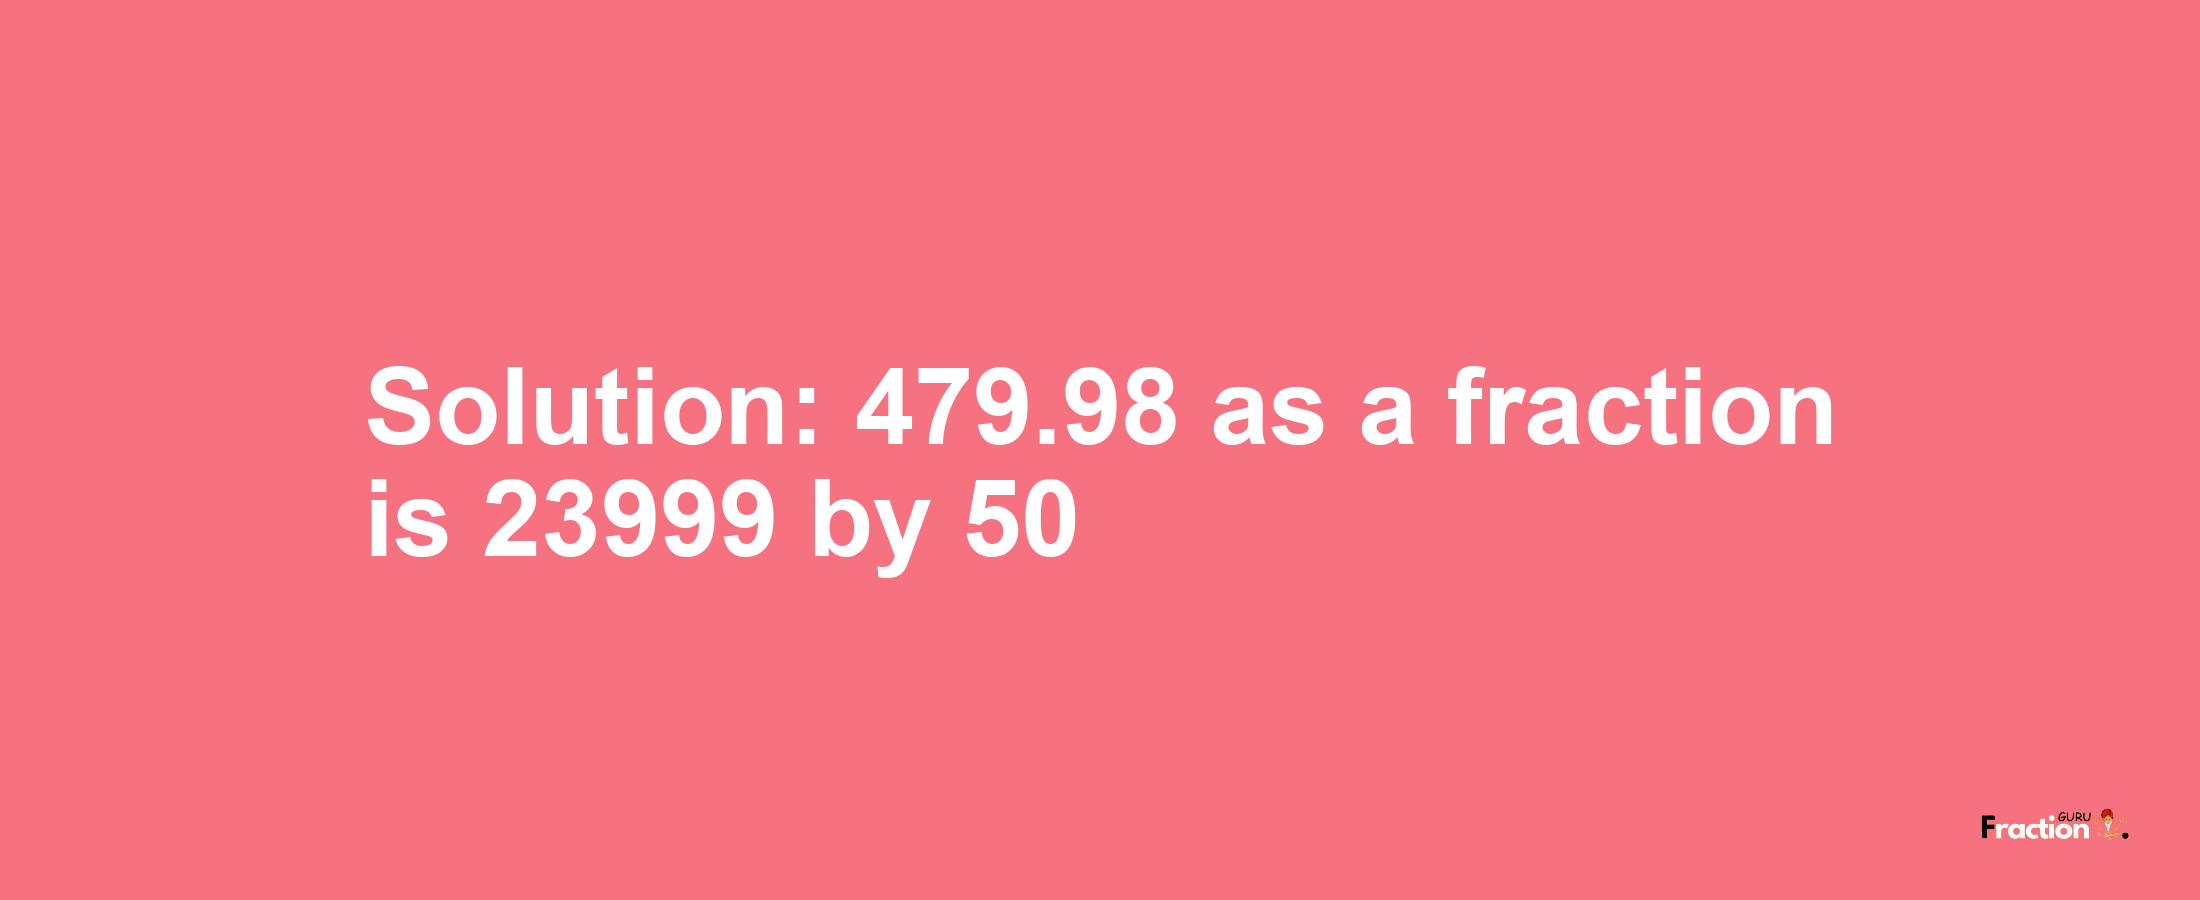 Solution:479.98 as a fraction is 23999/50